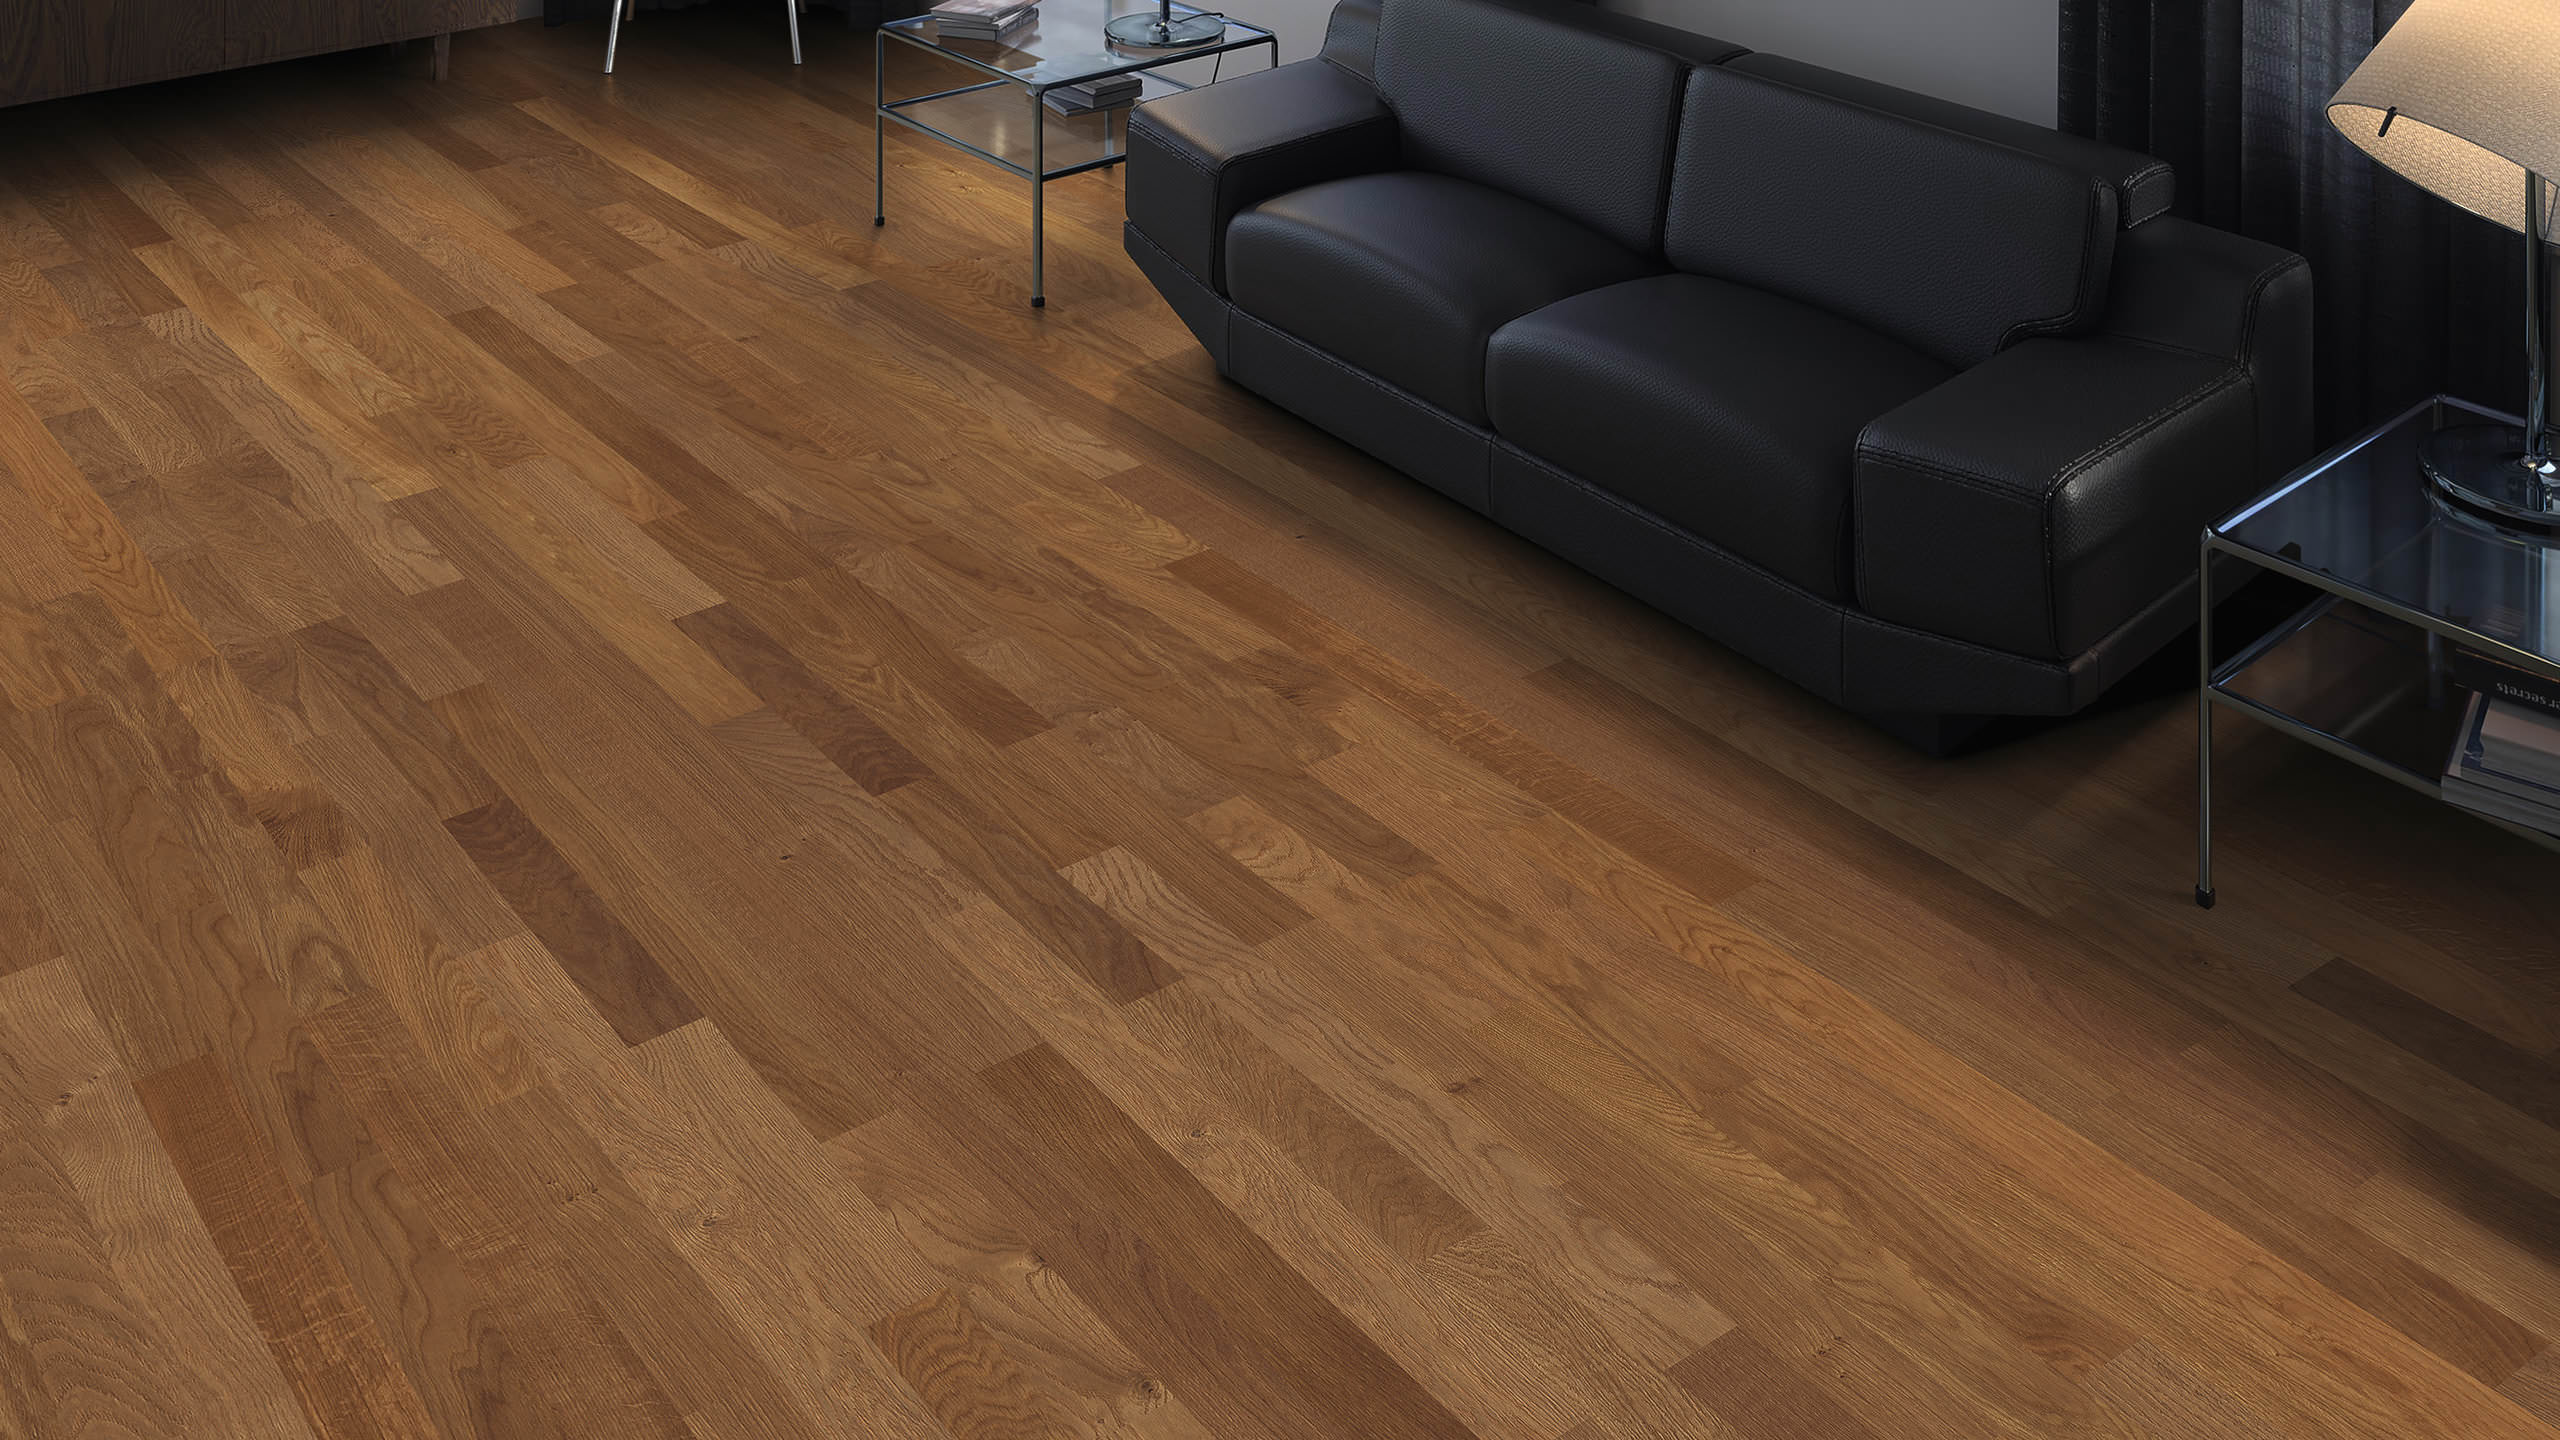 HARO PARQUET 4000 Strip Allegro Smoked Oak Naturale brushed naturaLin plus Tongue and Groove